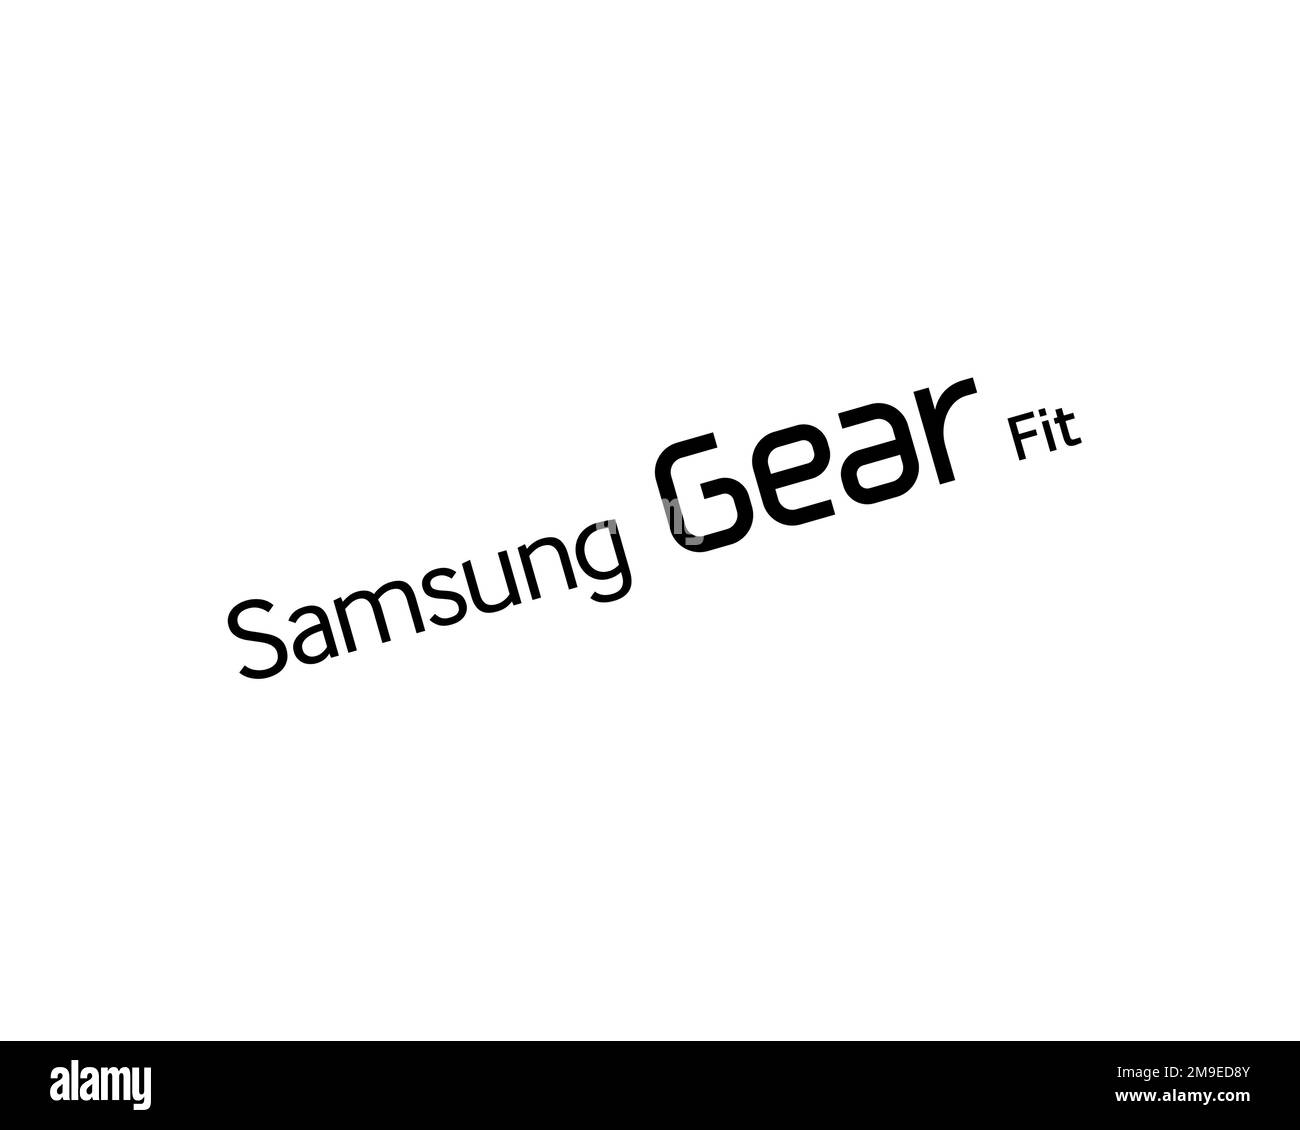 Samsung Gear Fit, Rotated Logo, White Background Stock Photo